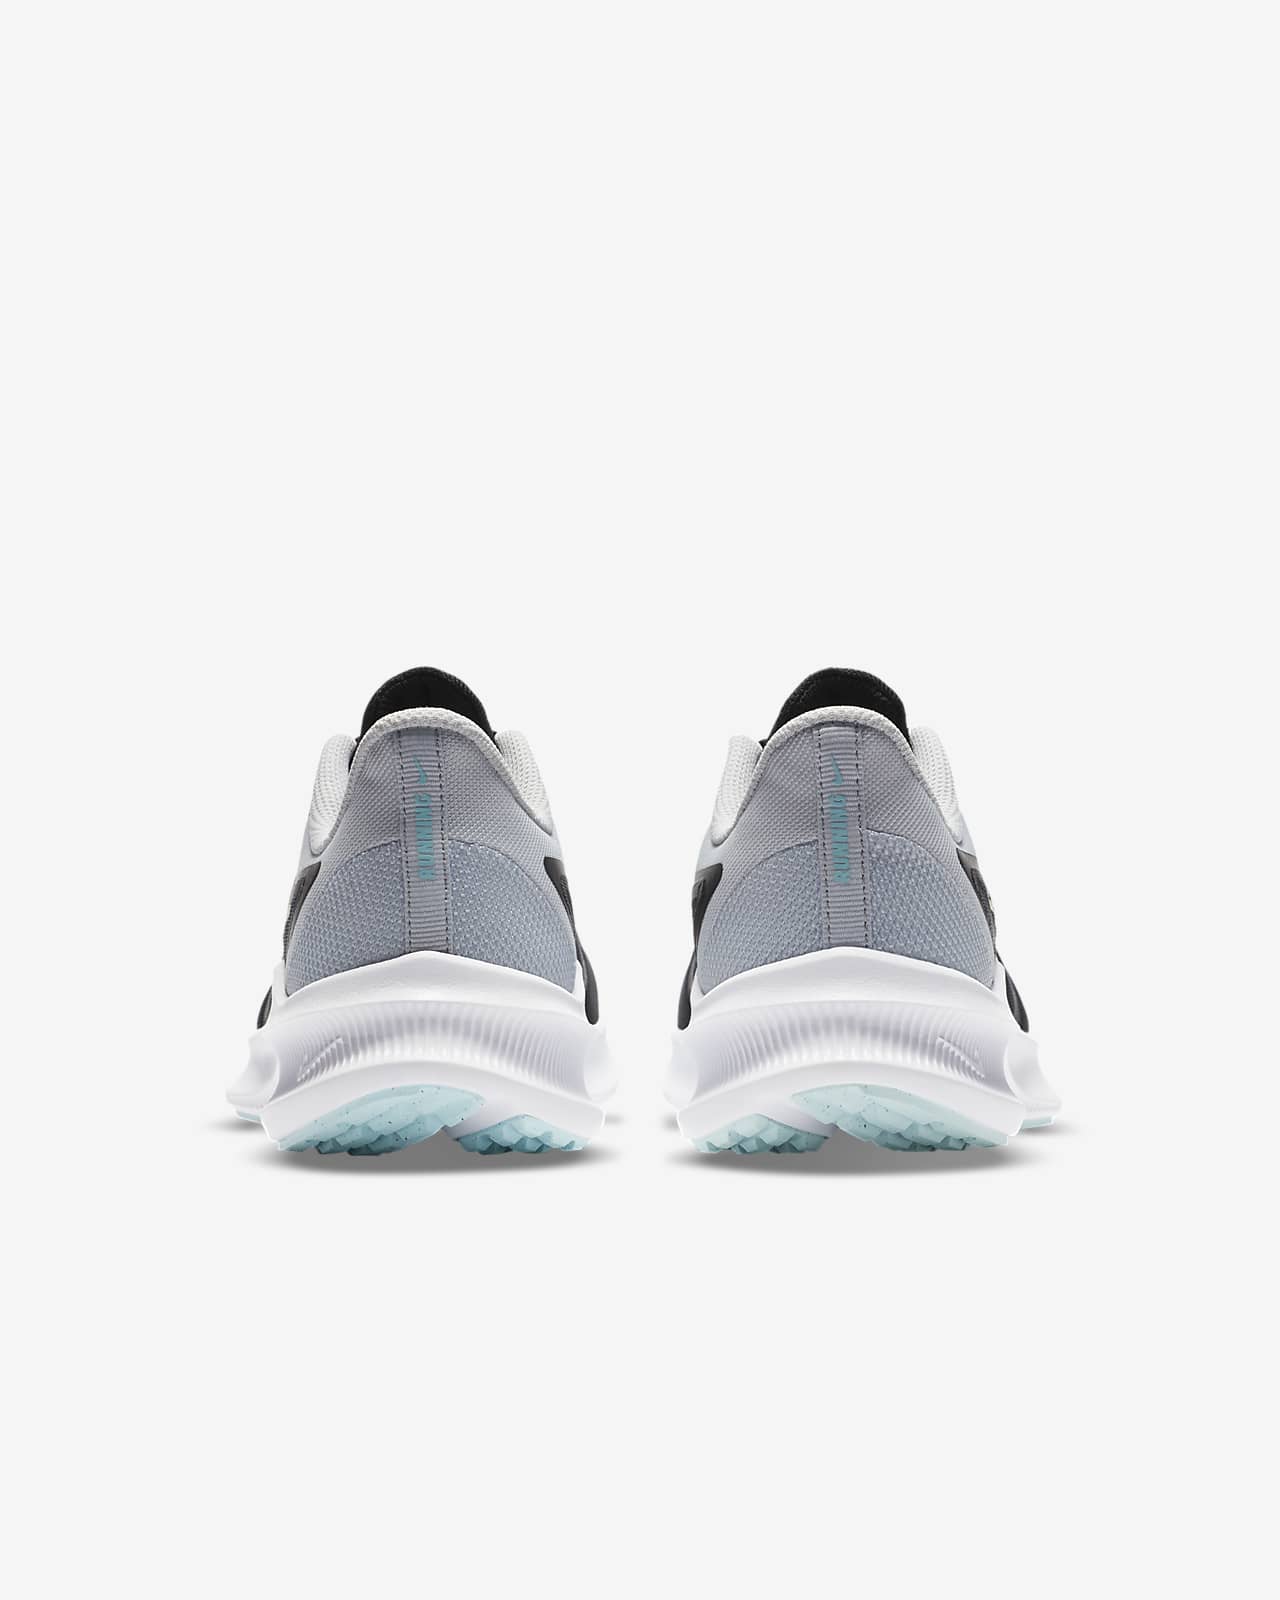 nike wmns downshifter 10